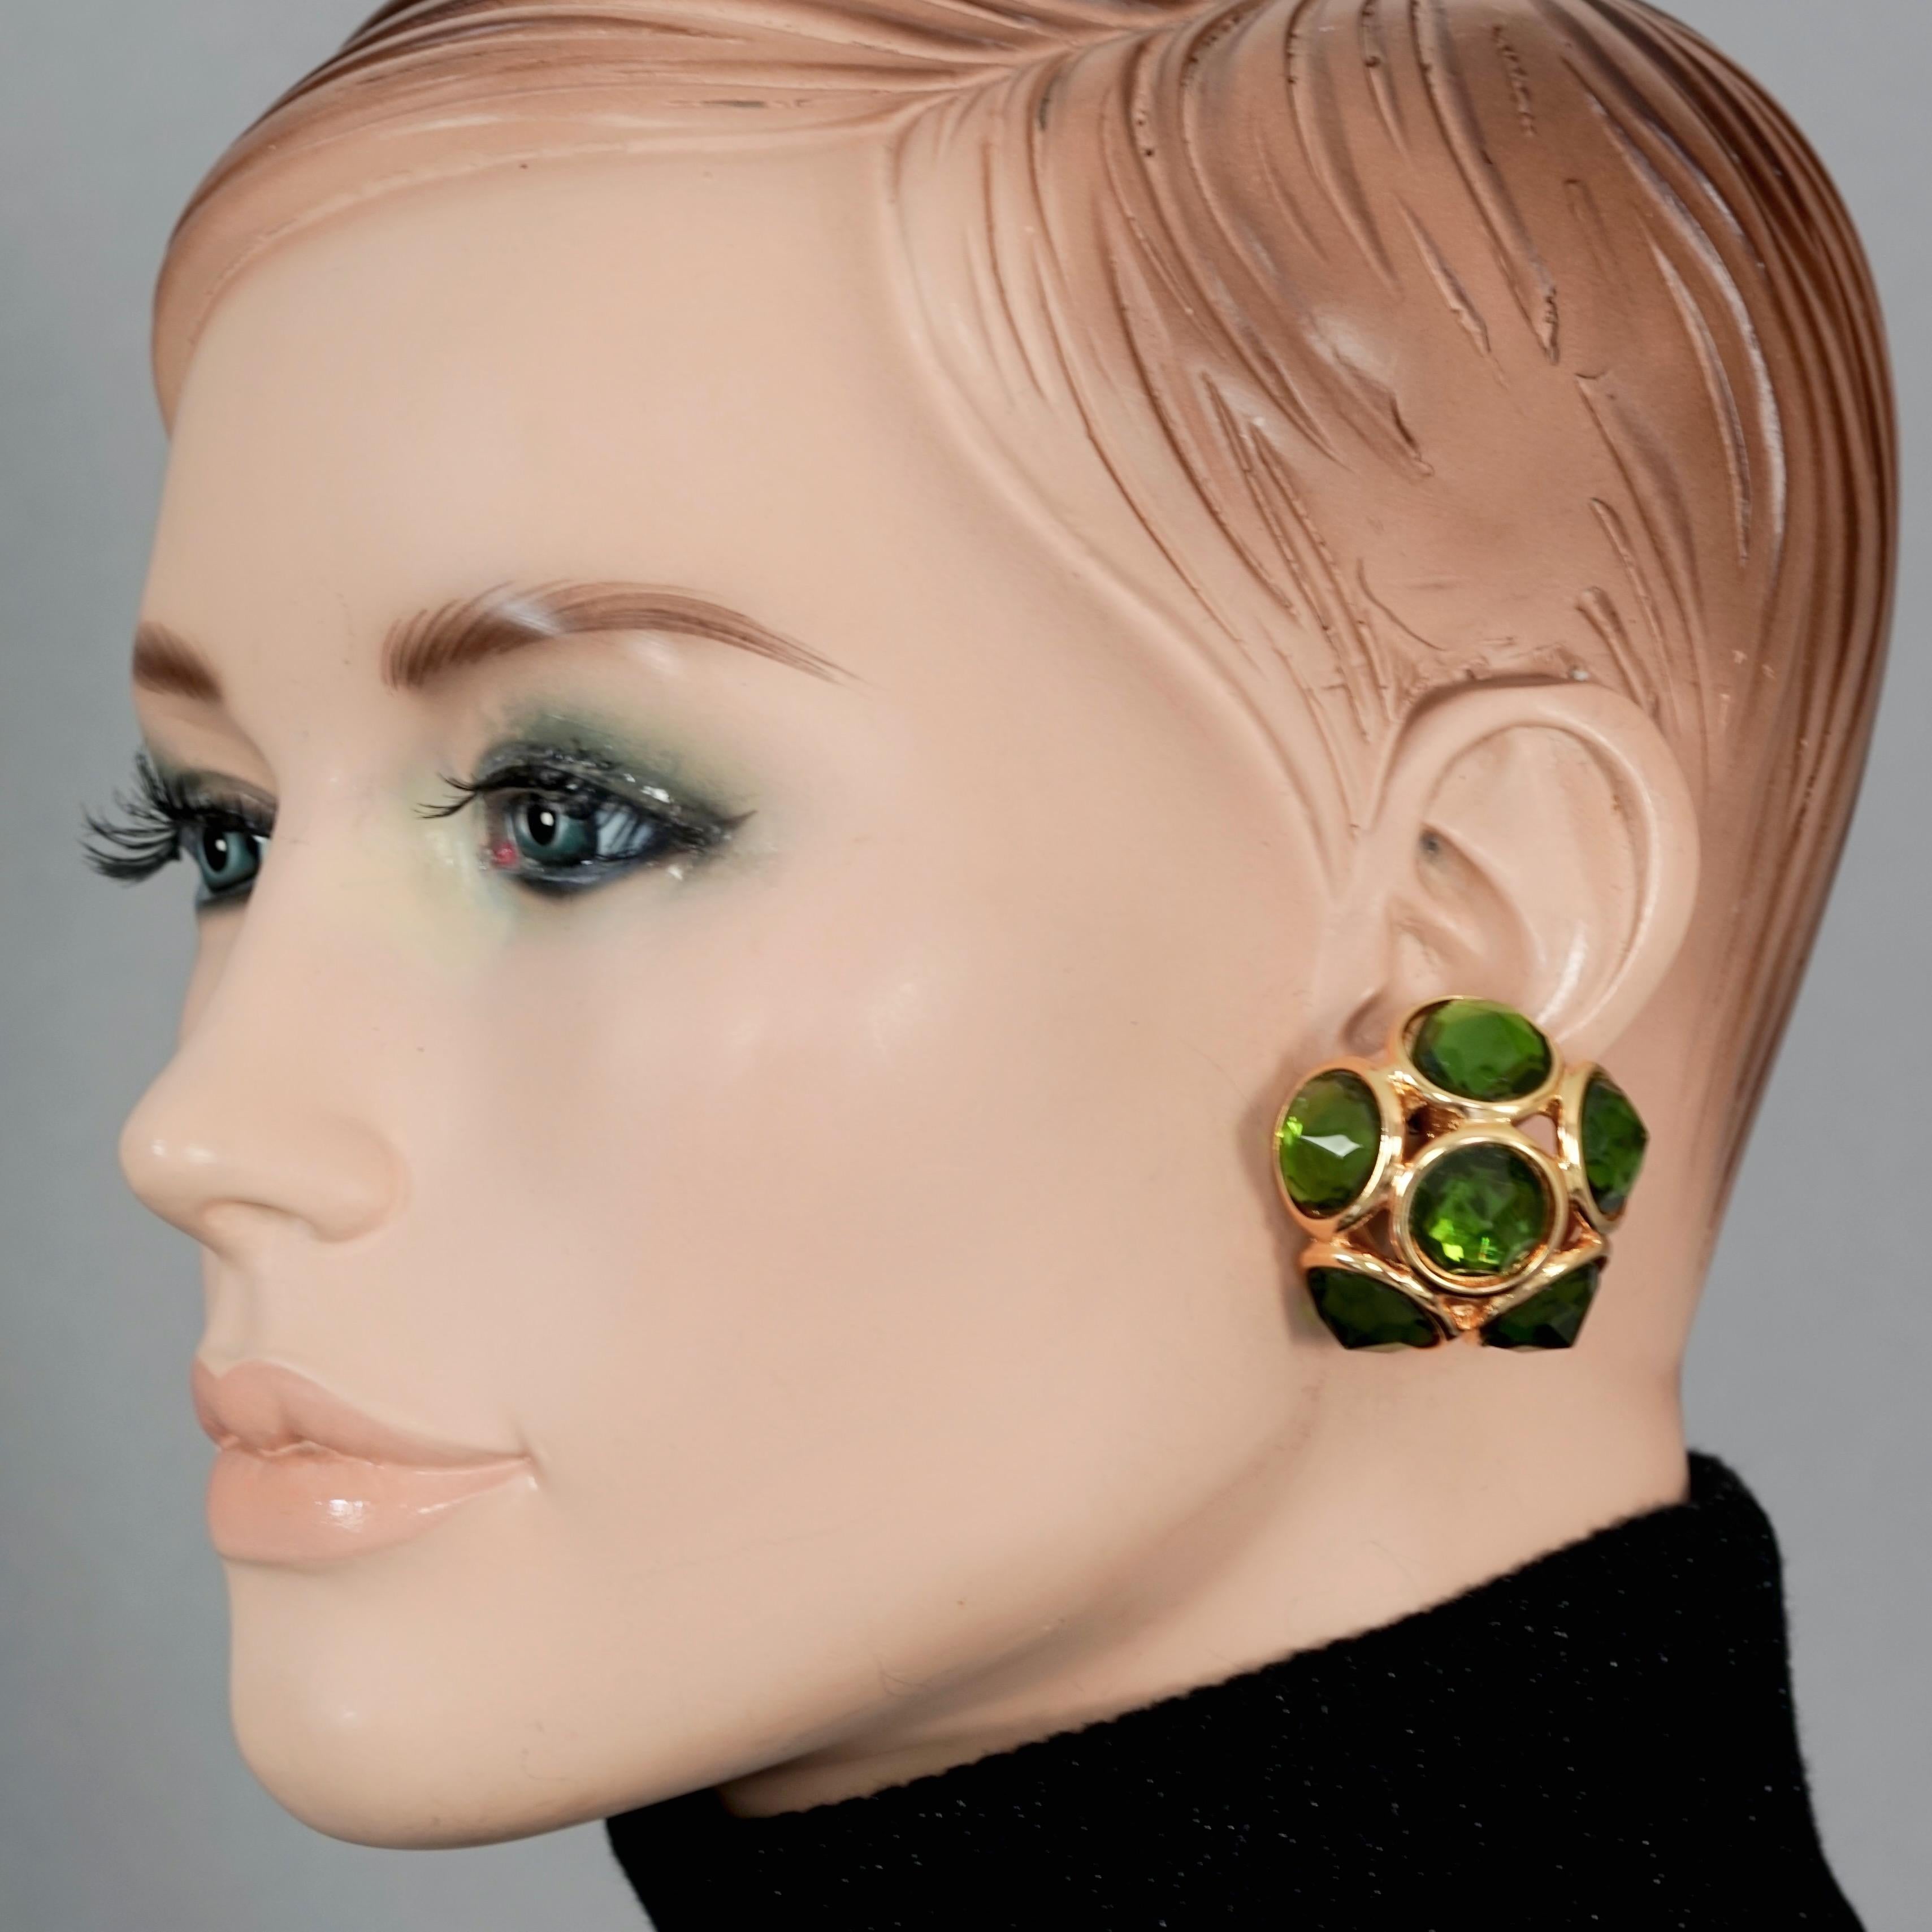 Vintage YVES SAINT LAURENT Ysl Flower Dome Green Rhinestones Earrings

Measurements:
Height: 1.37 inches (3.5 cm)
Width: 1.37 inches (3.5 cm)
Depth: 0.94 inch (2.4 cm)
Weight per Earring: 14 grams

Features:
- 100% Authentic Yves Saint Laurent.
-